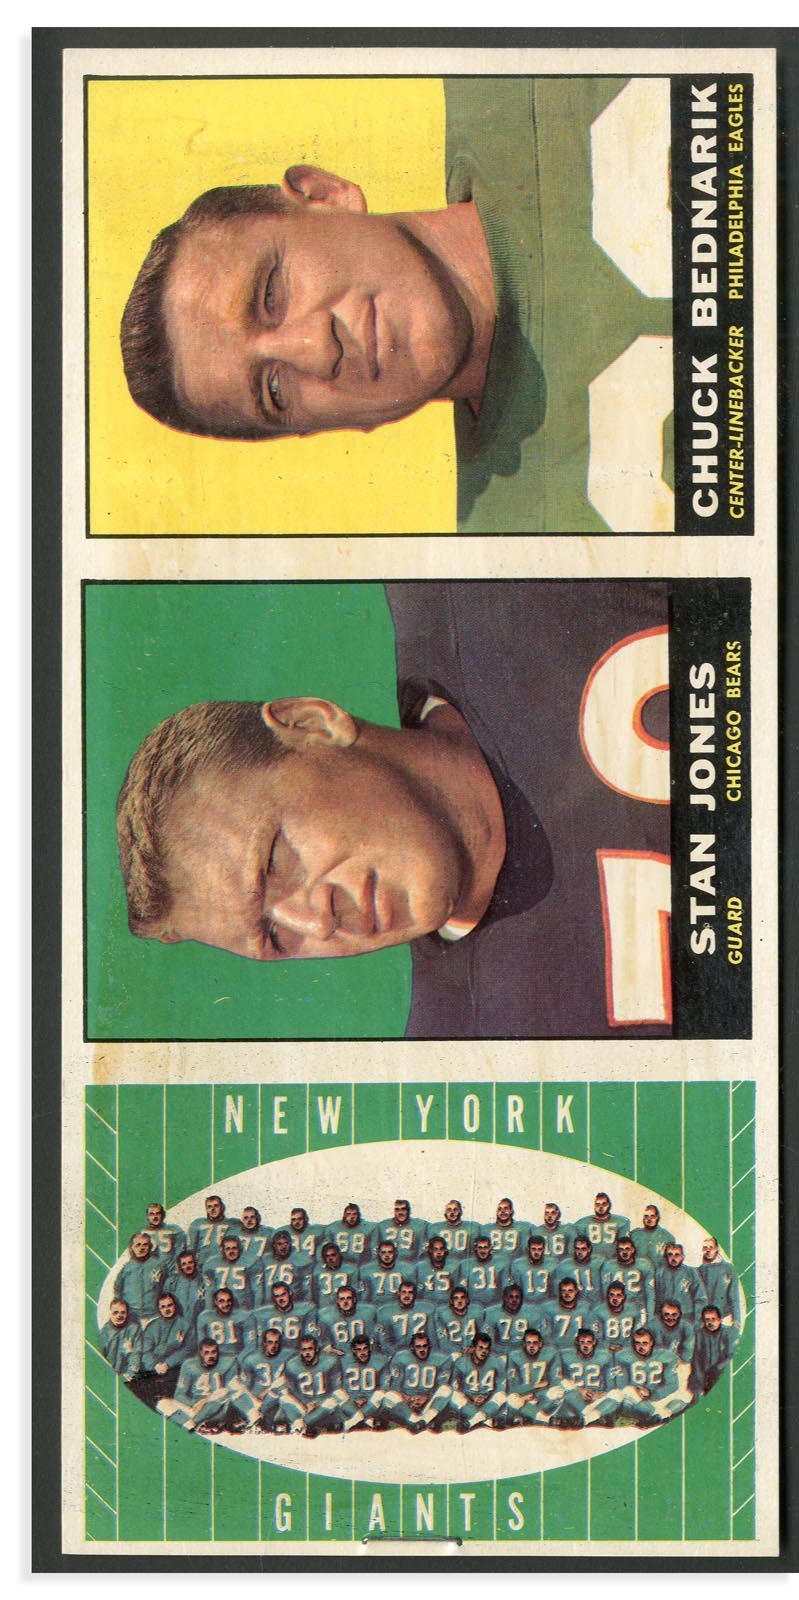 - 1961 Topps Football "Tryptch" Advertising Card from Fleer Archive